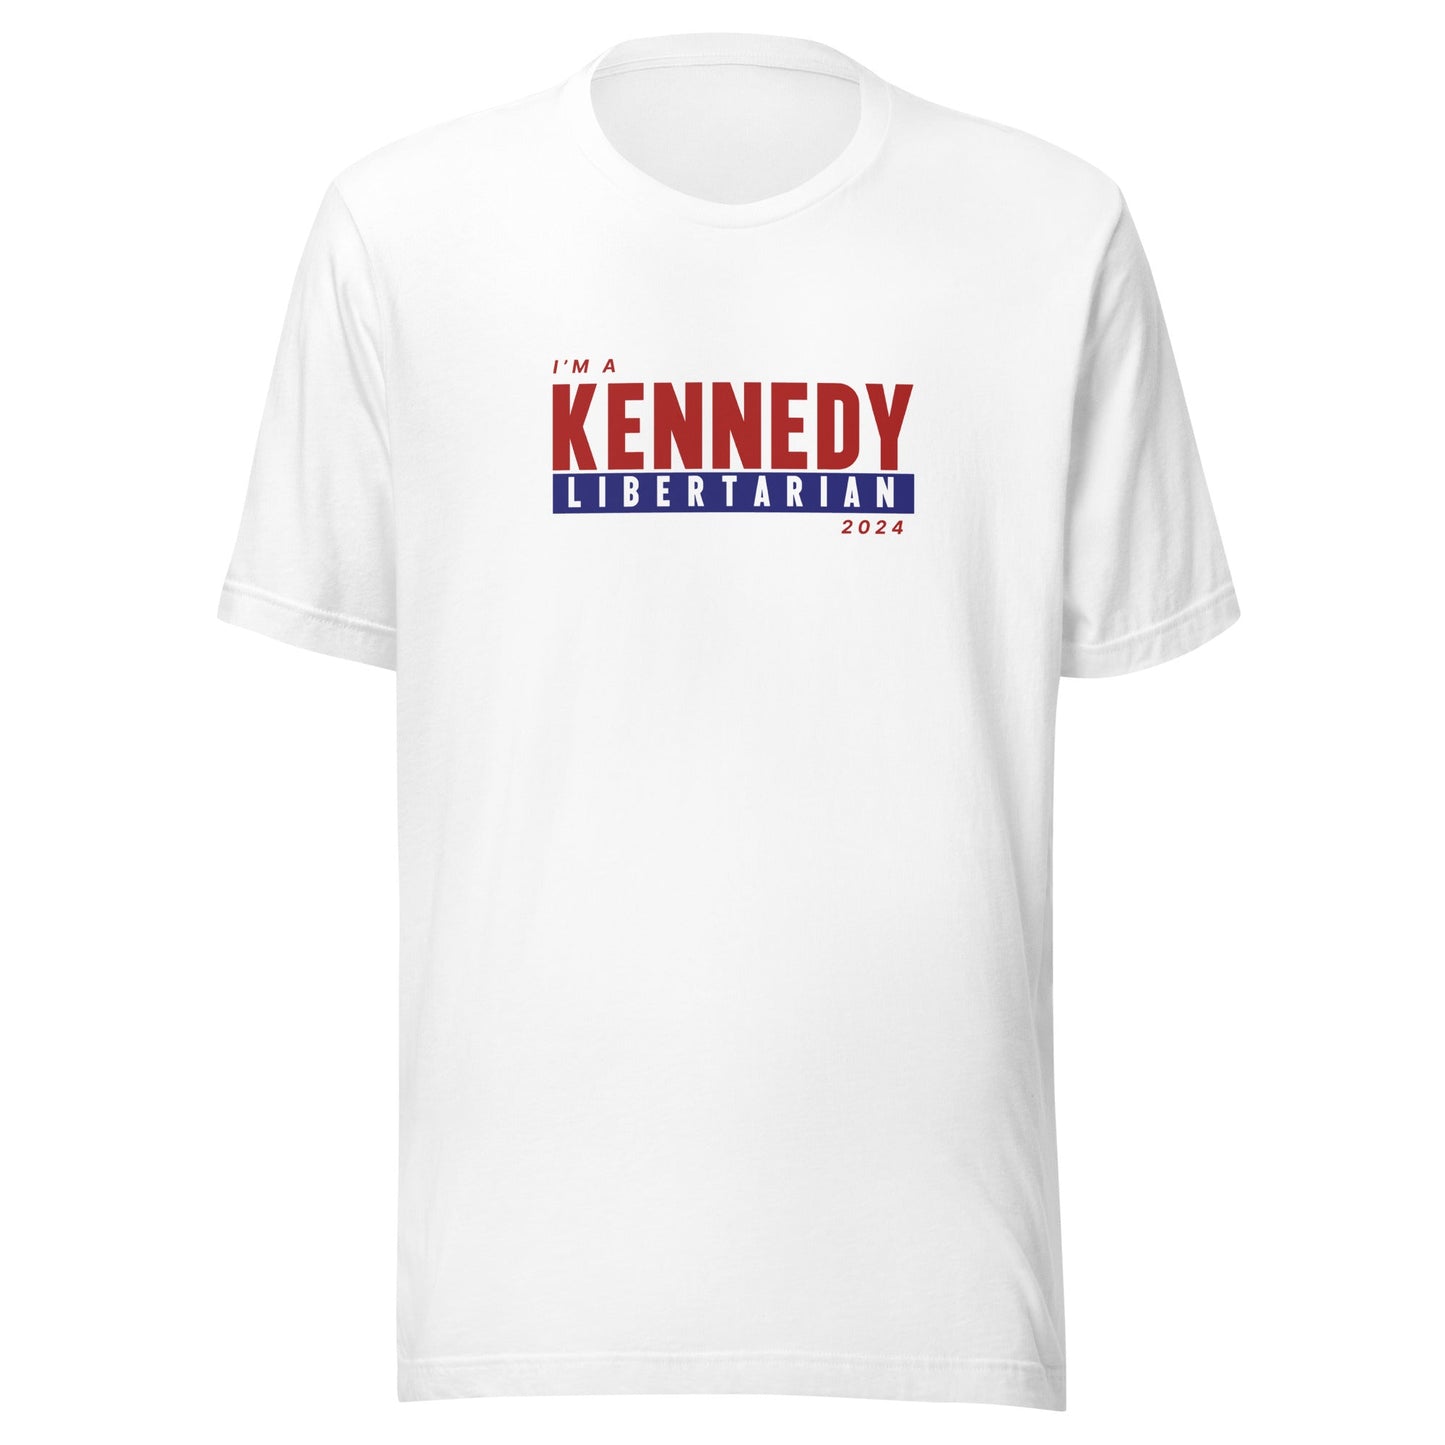 I'm a Kennedy Libertarian Unisex Tee - TEAM KENNEDY. All rights reserved